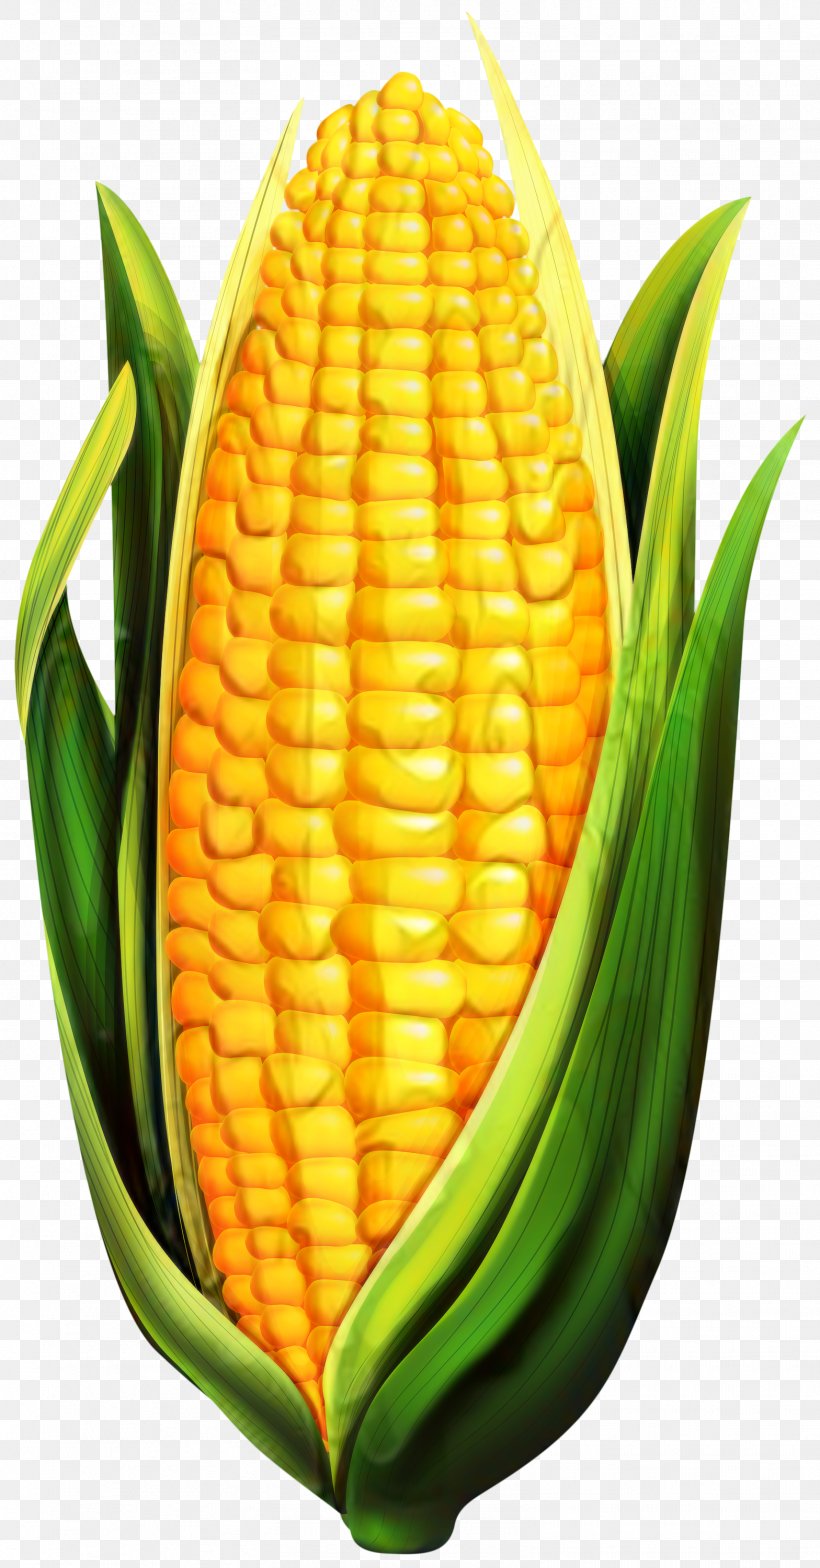 Corn On The Cob Sweet Corn Pineapple Commodity, PNG, 1568x3000px, Corn On The Cob, Commodity, Corn, Corn Kernels, Cuisine Download Free